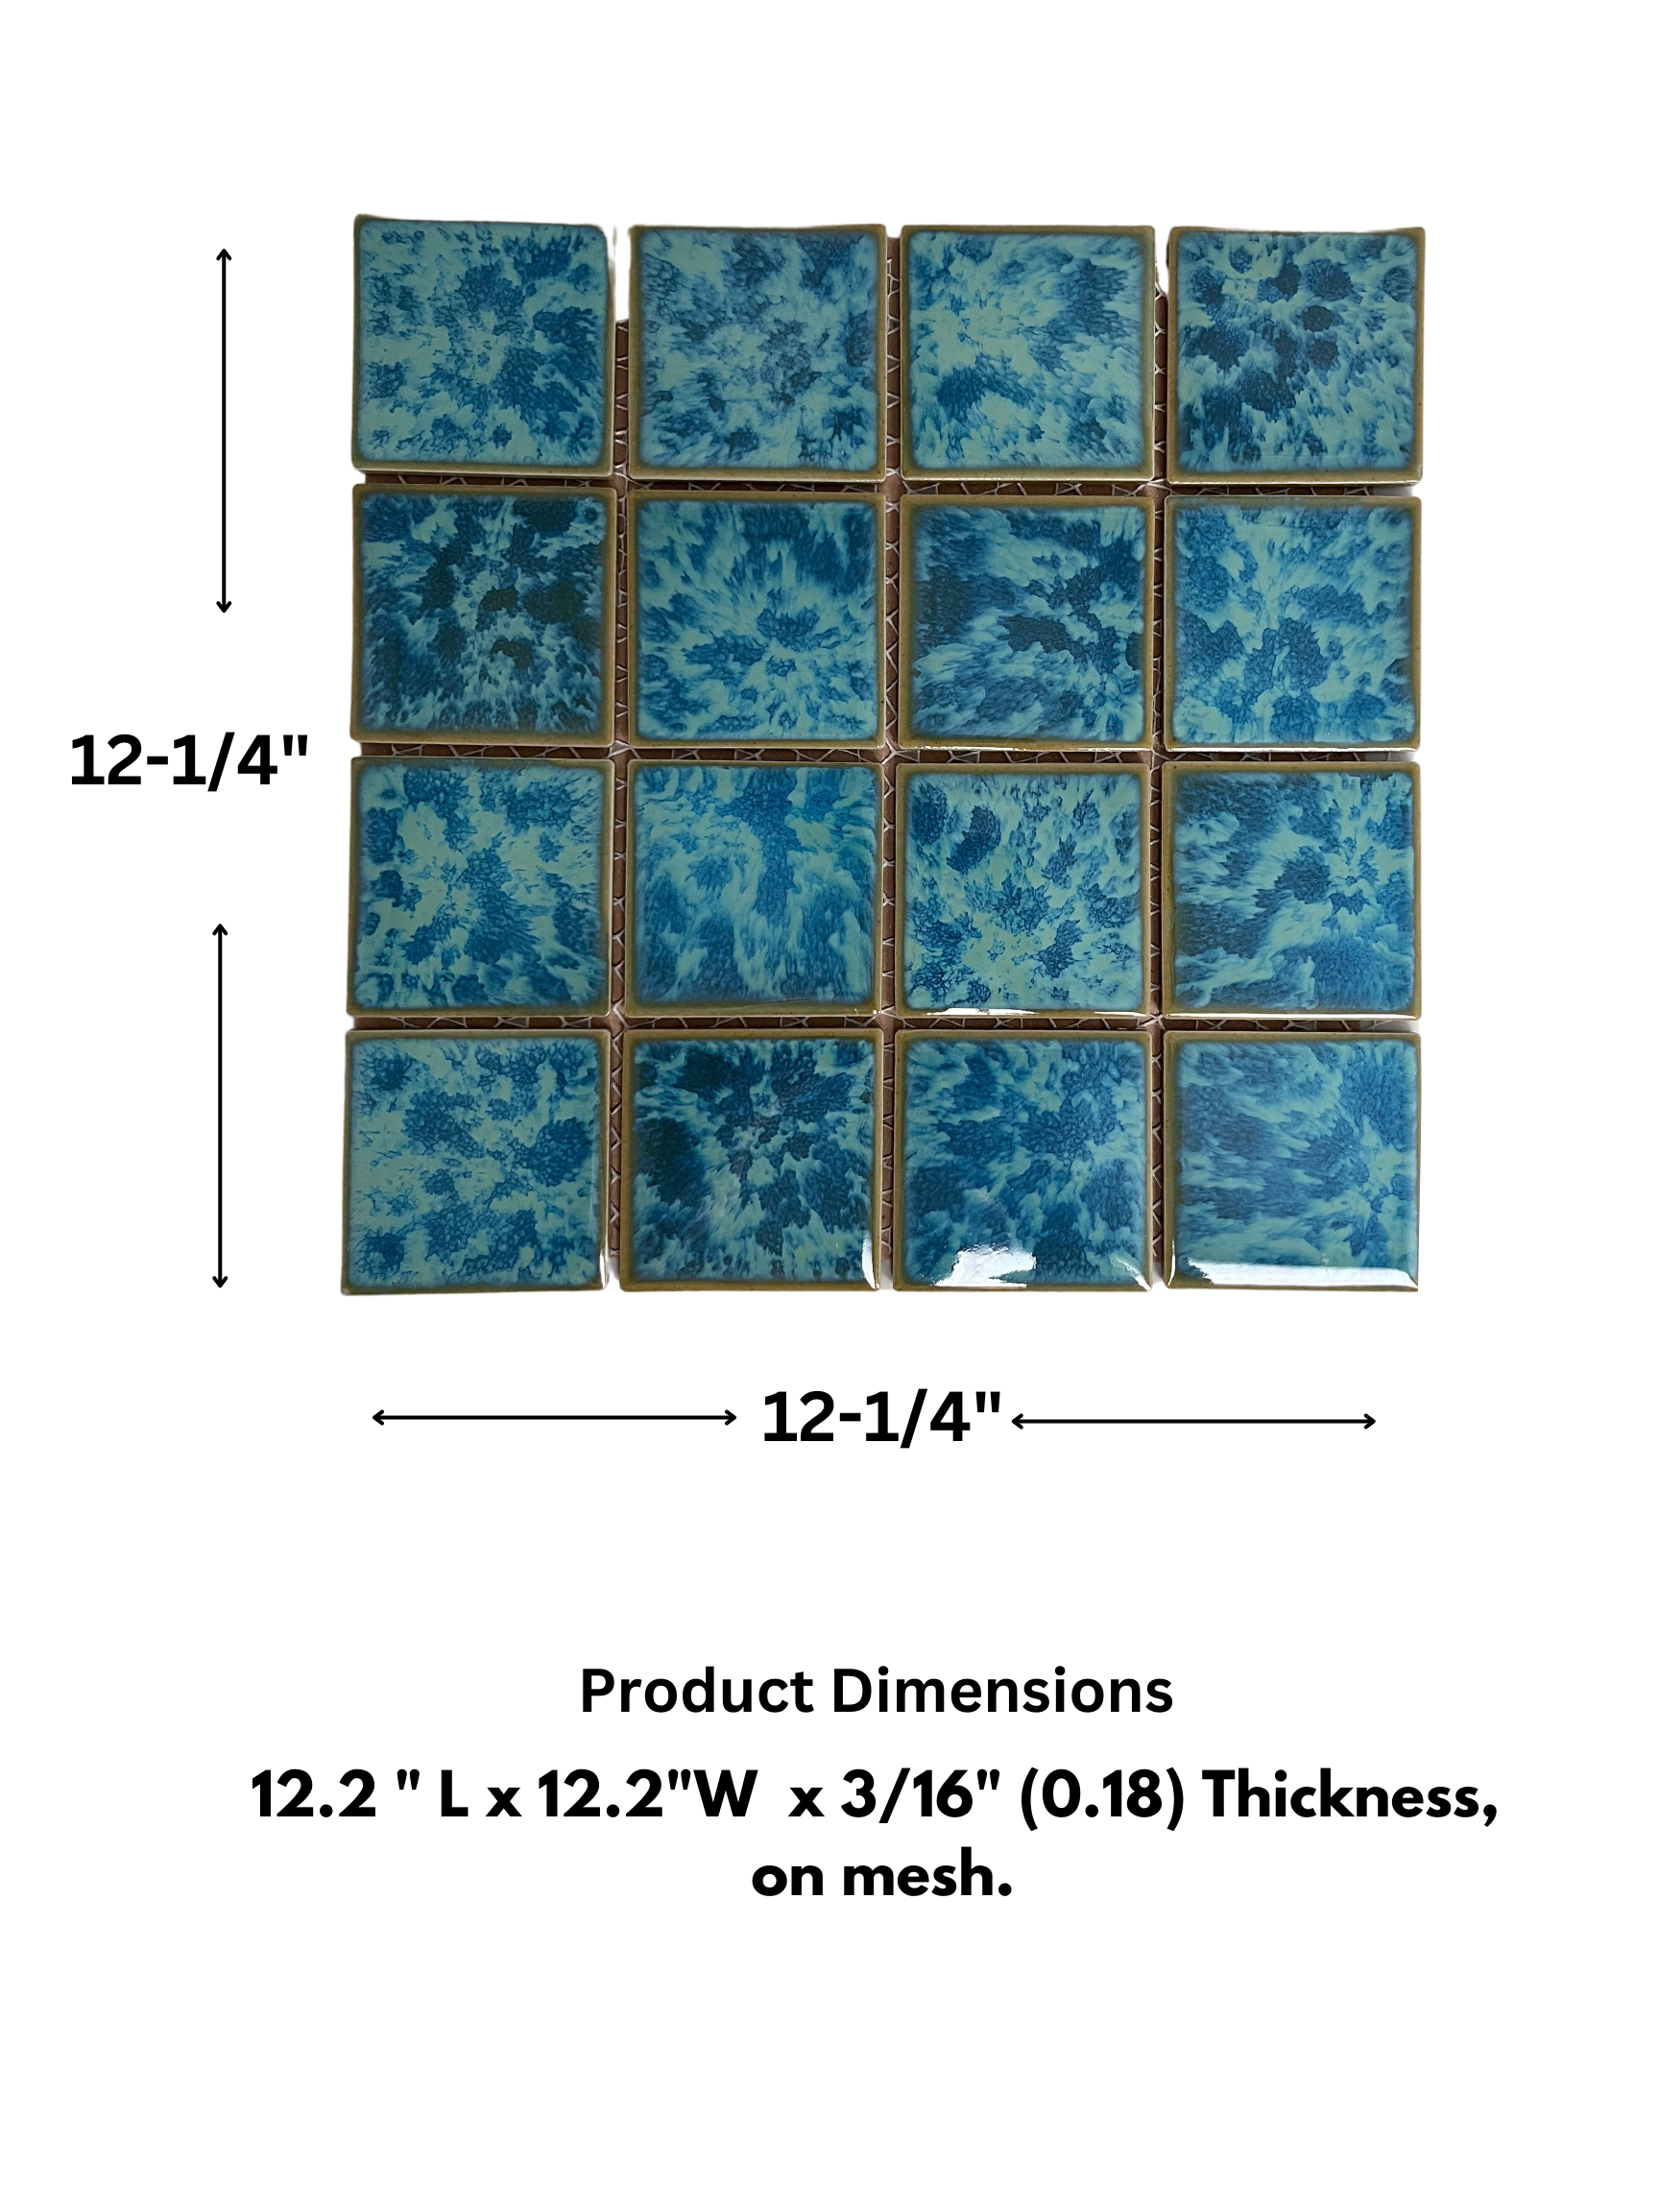 Tenedos TBHMD-3x3-PL Ocean Green Jellyfish Square Square 3x3 Porcelain Pool Mosaic Floor and Wall Tile for Backsplash, Kitchen, Bathroom, Swimming Pool